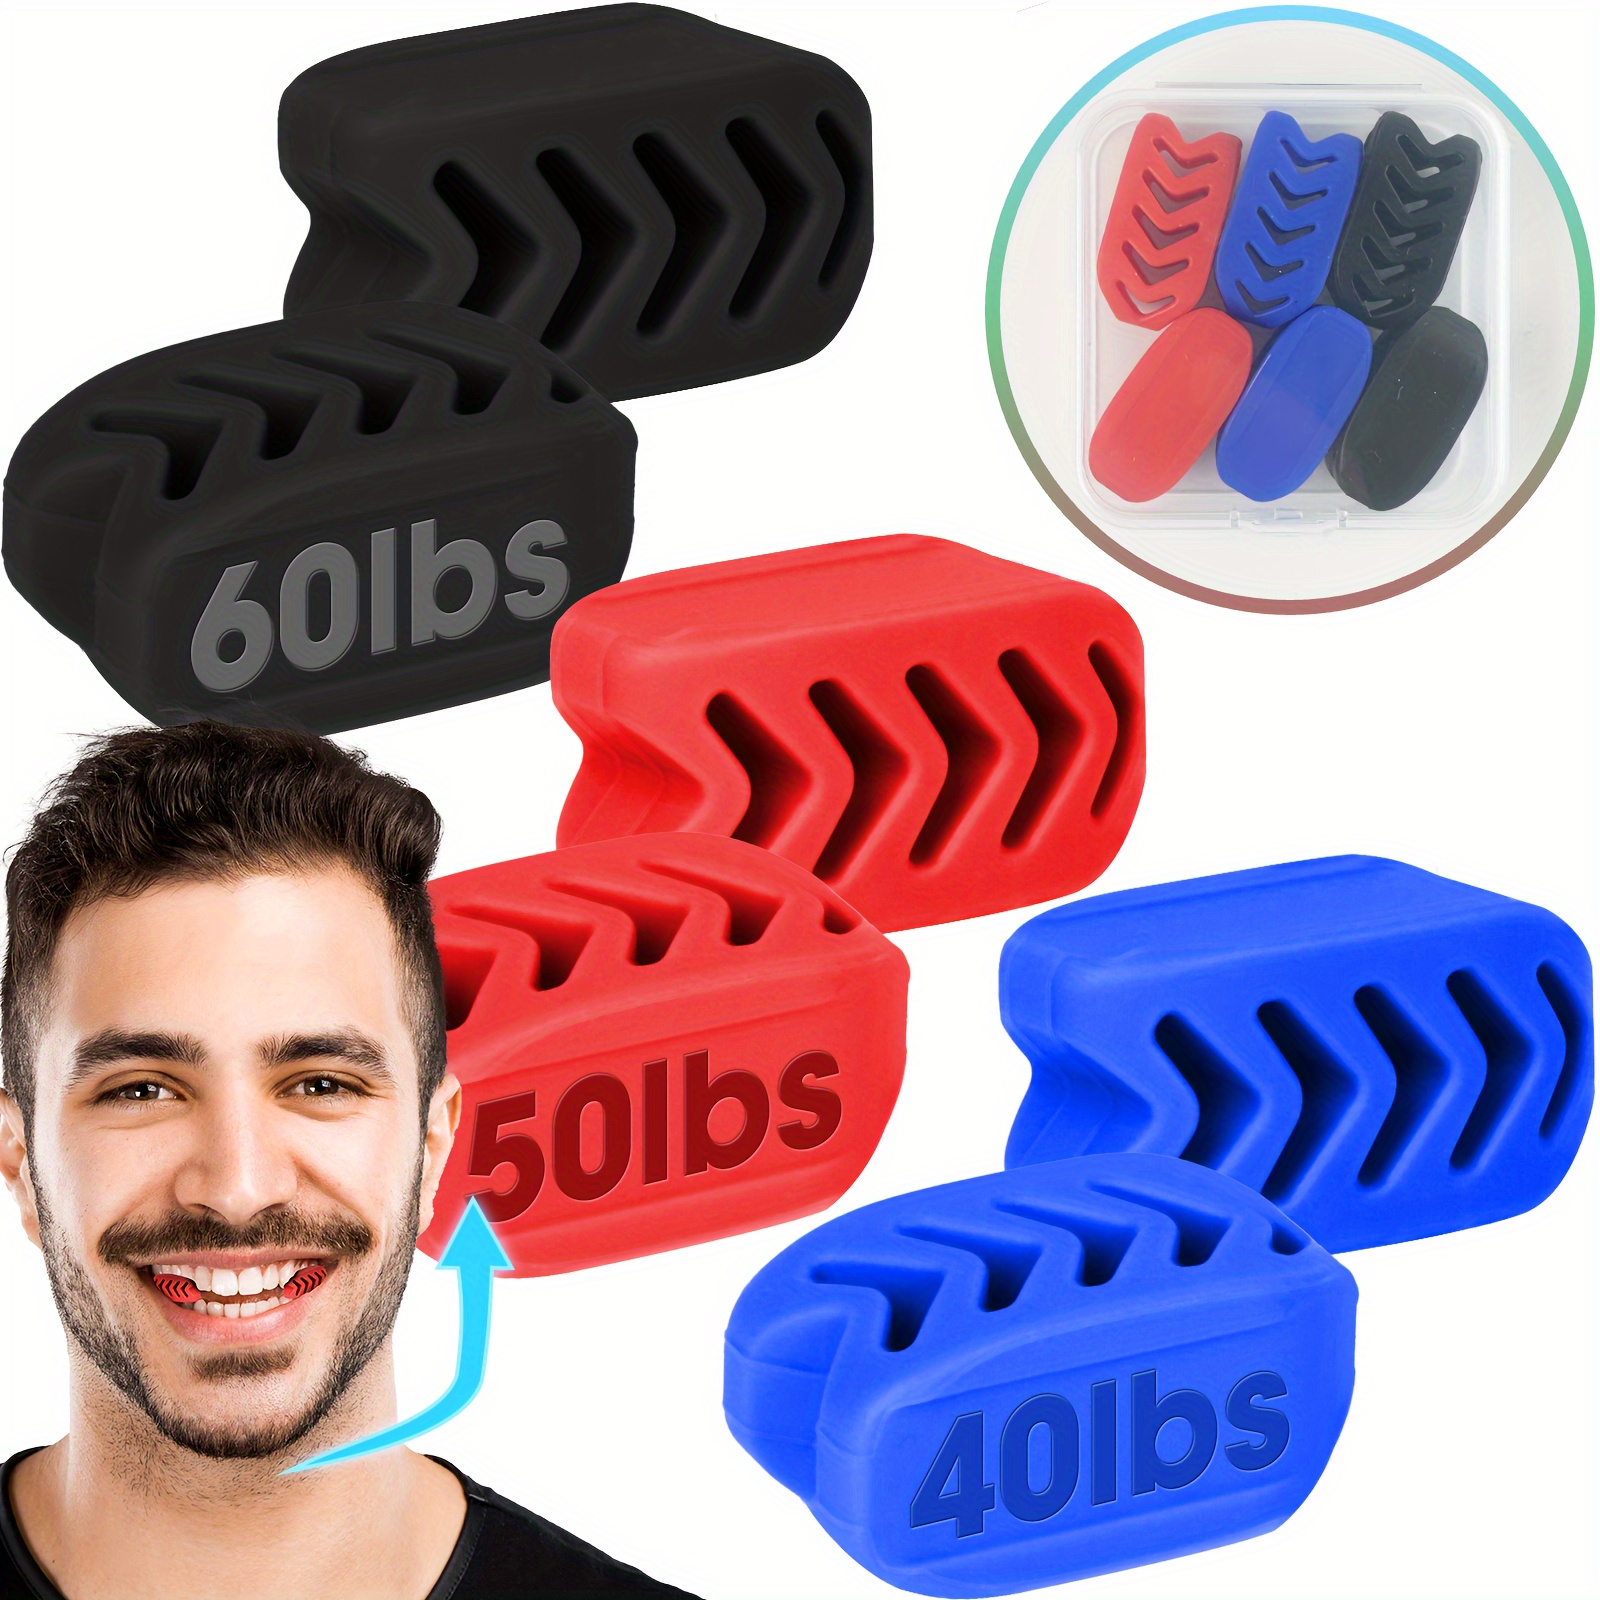 

Upgraded Fish-bone Design Jaw Exerciser For Men & Women, 6pcs, 3 Resistance Levels(40/50/60lbs), 100% Bpa-free Silicone Jaw Trainer, Facial Muscle Trainer, Jawline Exerciser, Strengthener And Shaper